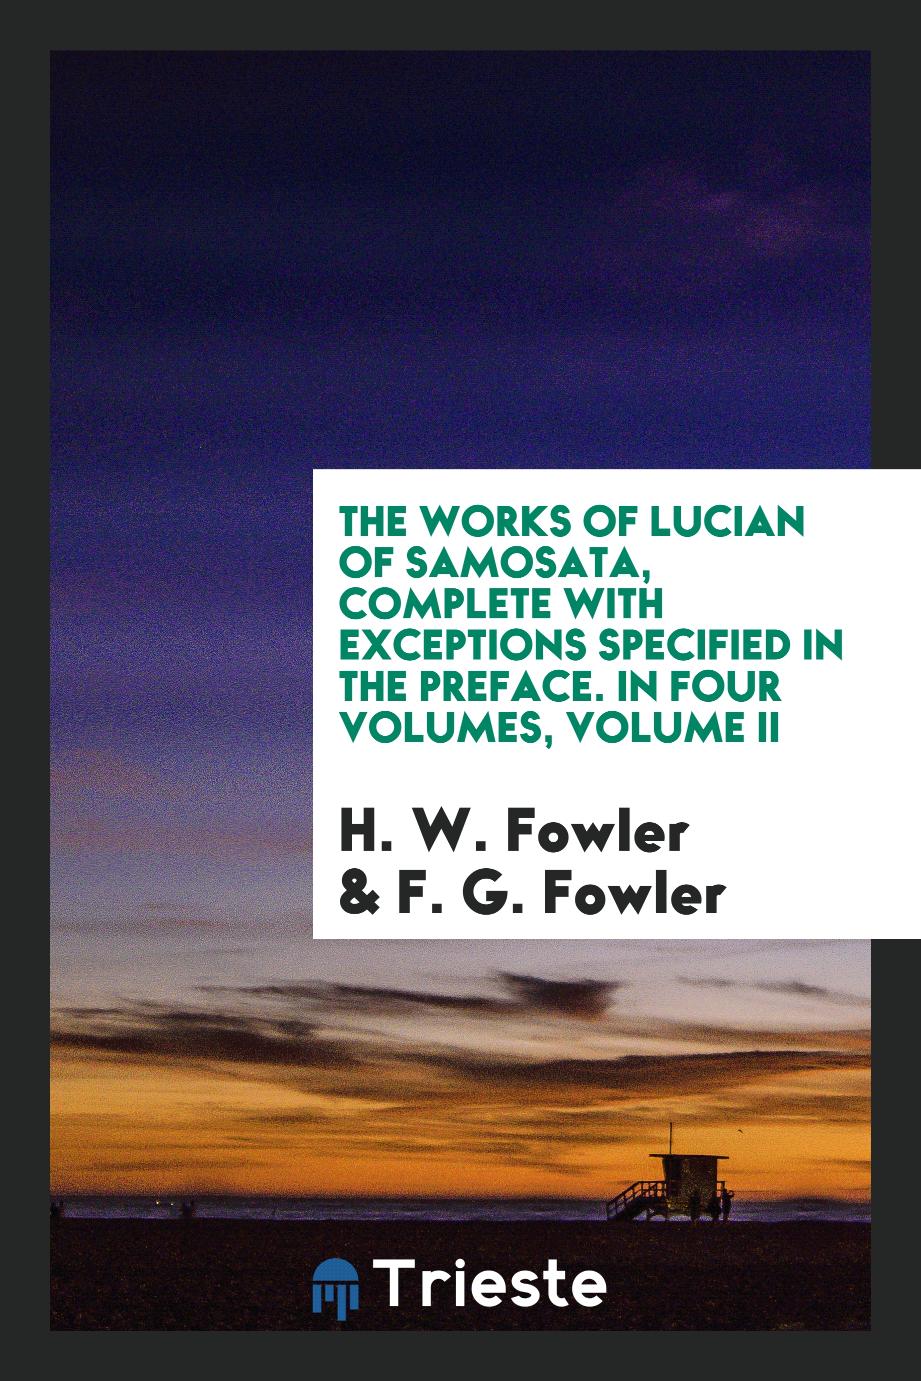 The works of Lucian of Samosata, complete with exceptions specified in the preface. In four Volumes, Volume II